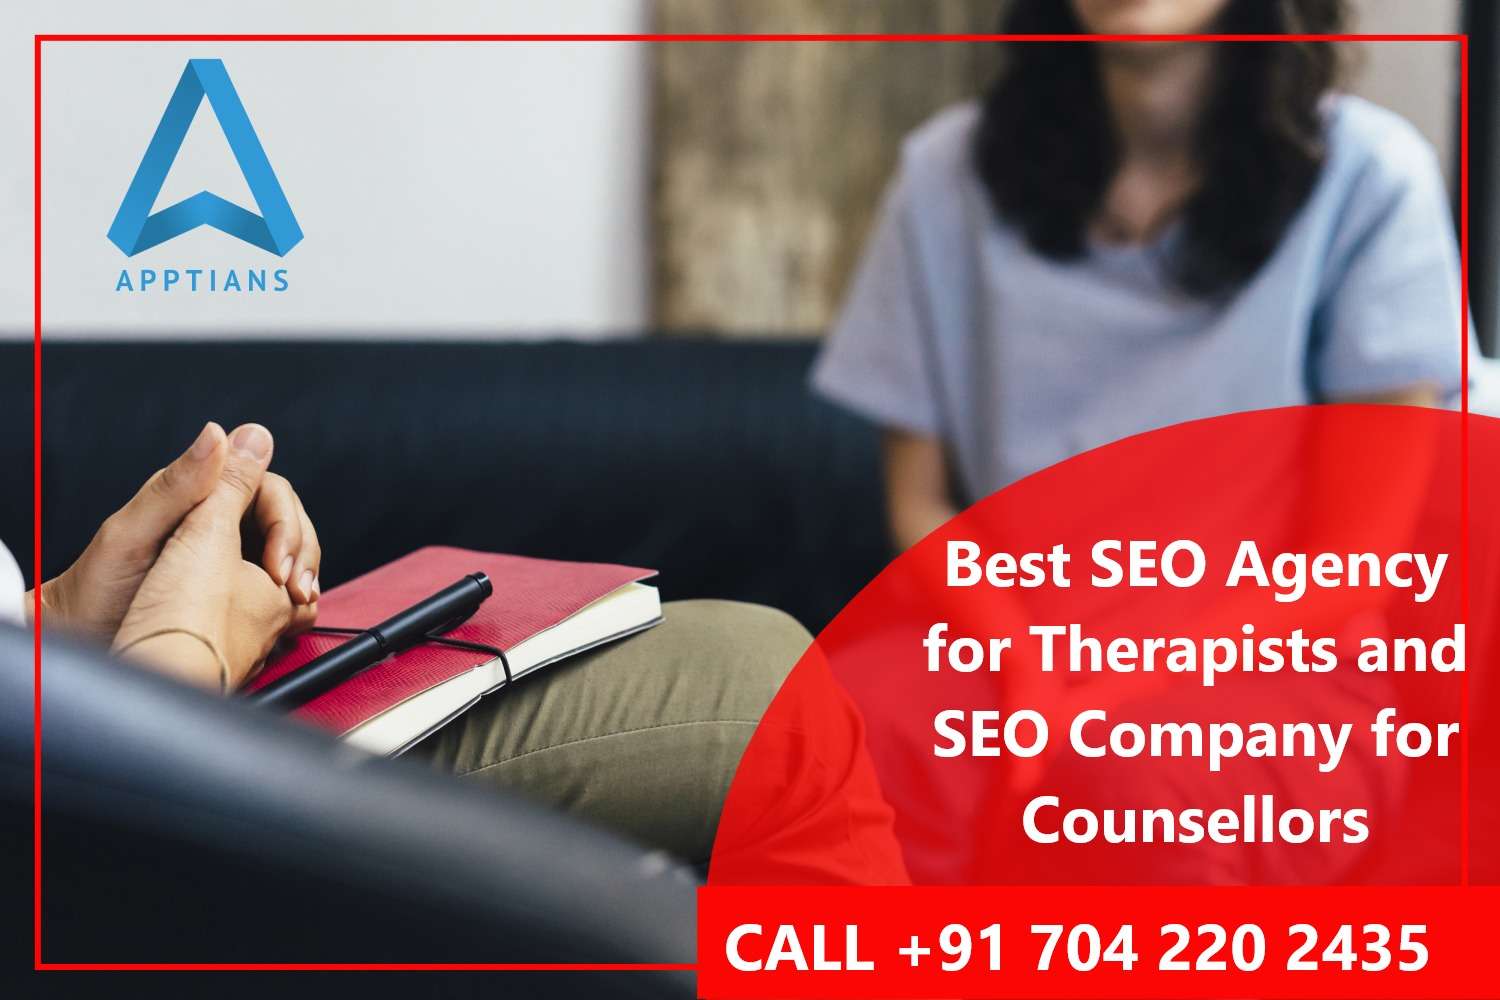 SEO Company for Counsellors